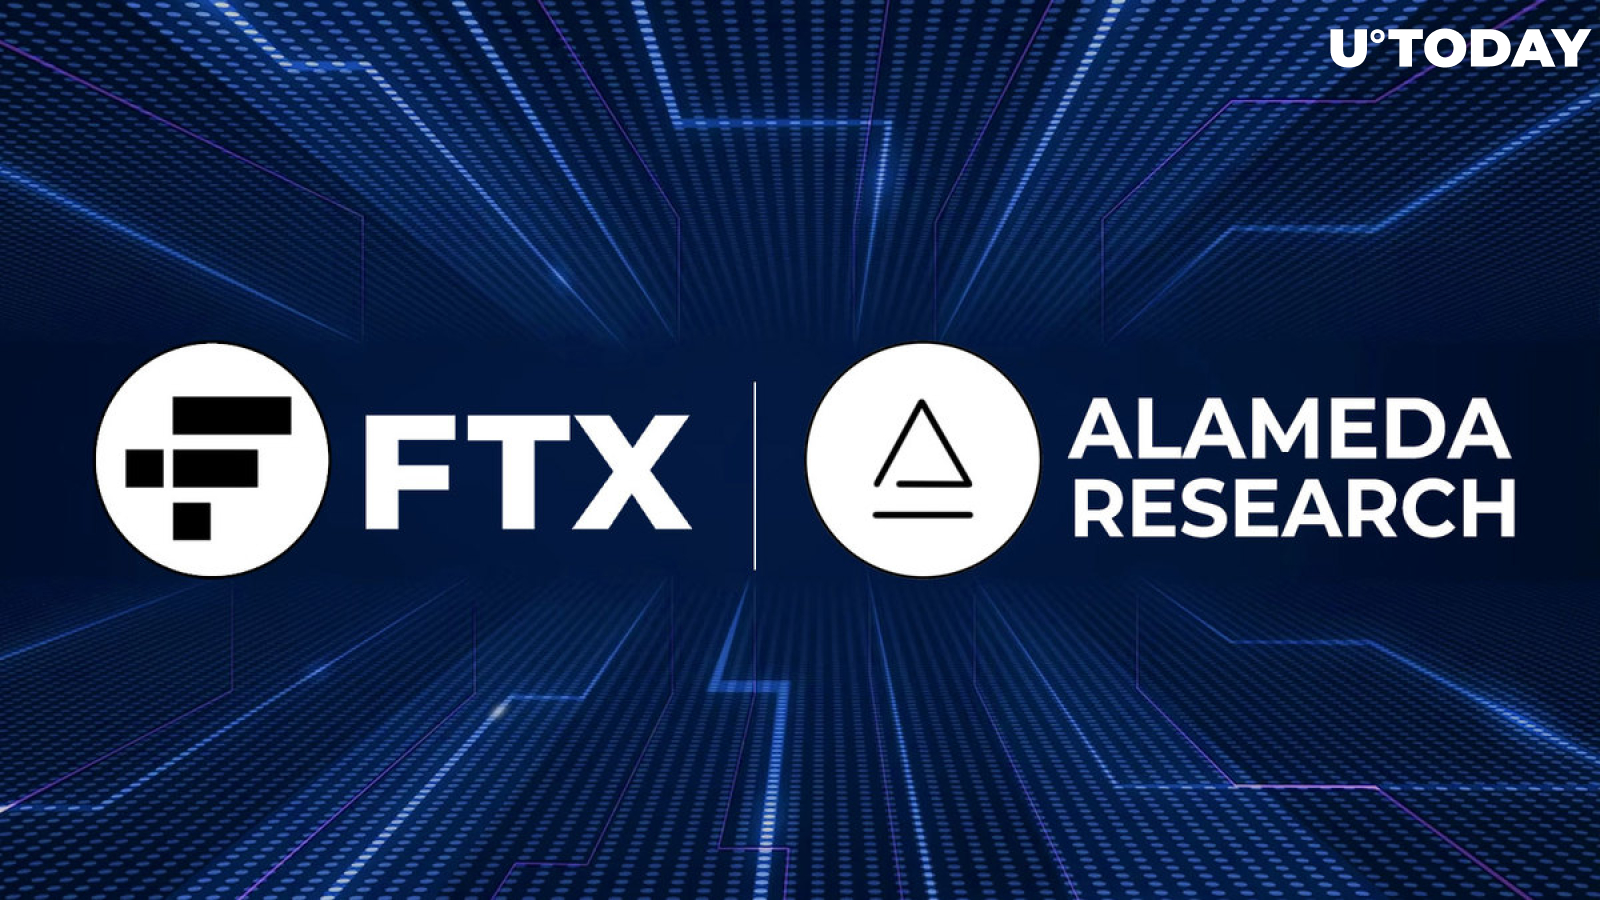 FTX and Alameda Addresses Suddenly Wake up, Move $190 Million on Exchanges